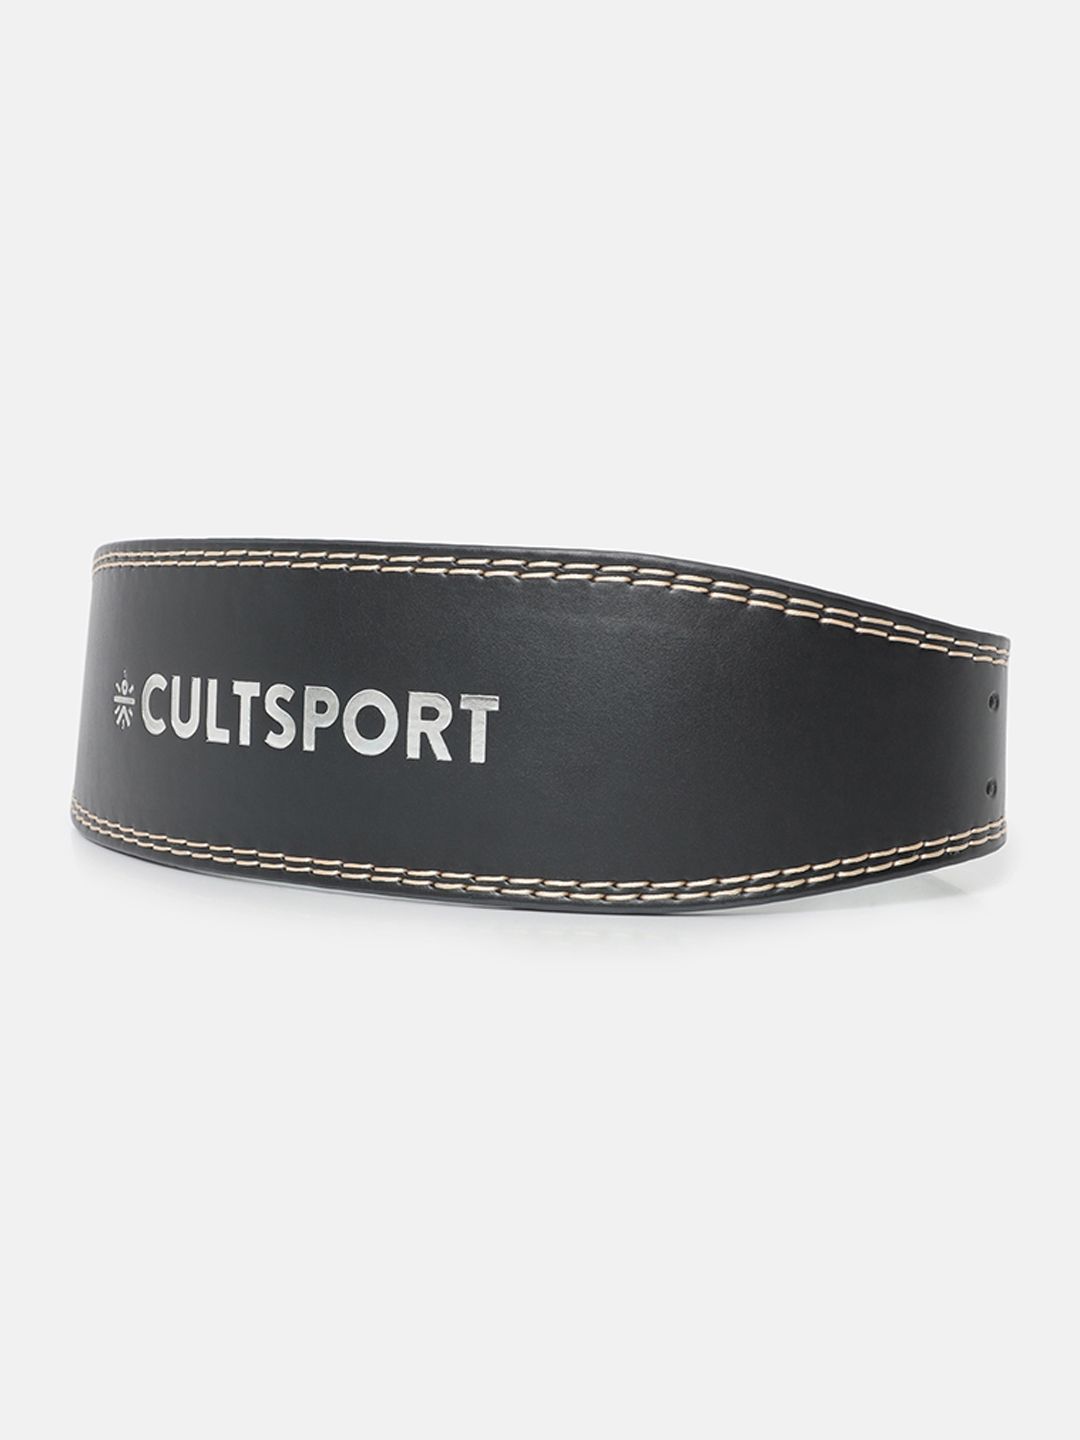 Cultsport Black Solid Workout Weight Lifting Belt Price in India